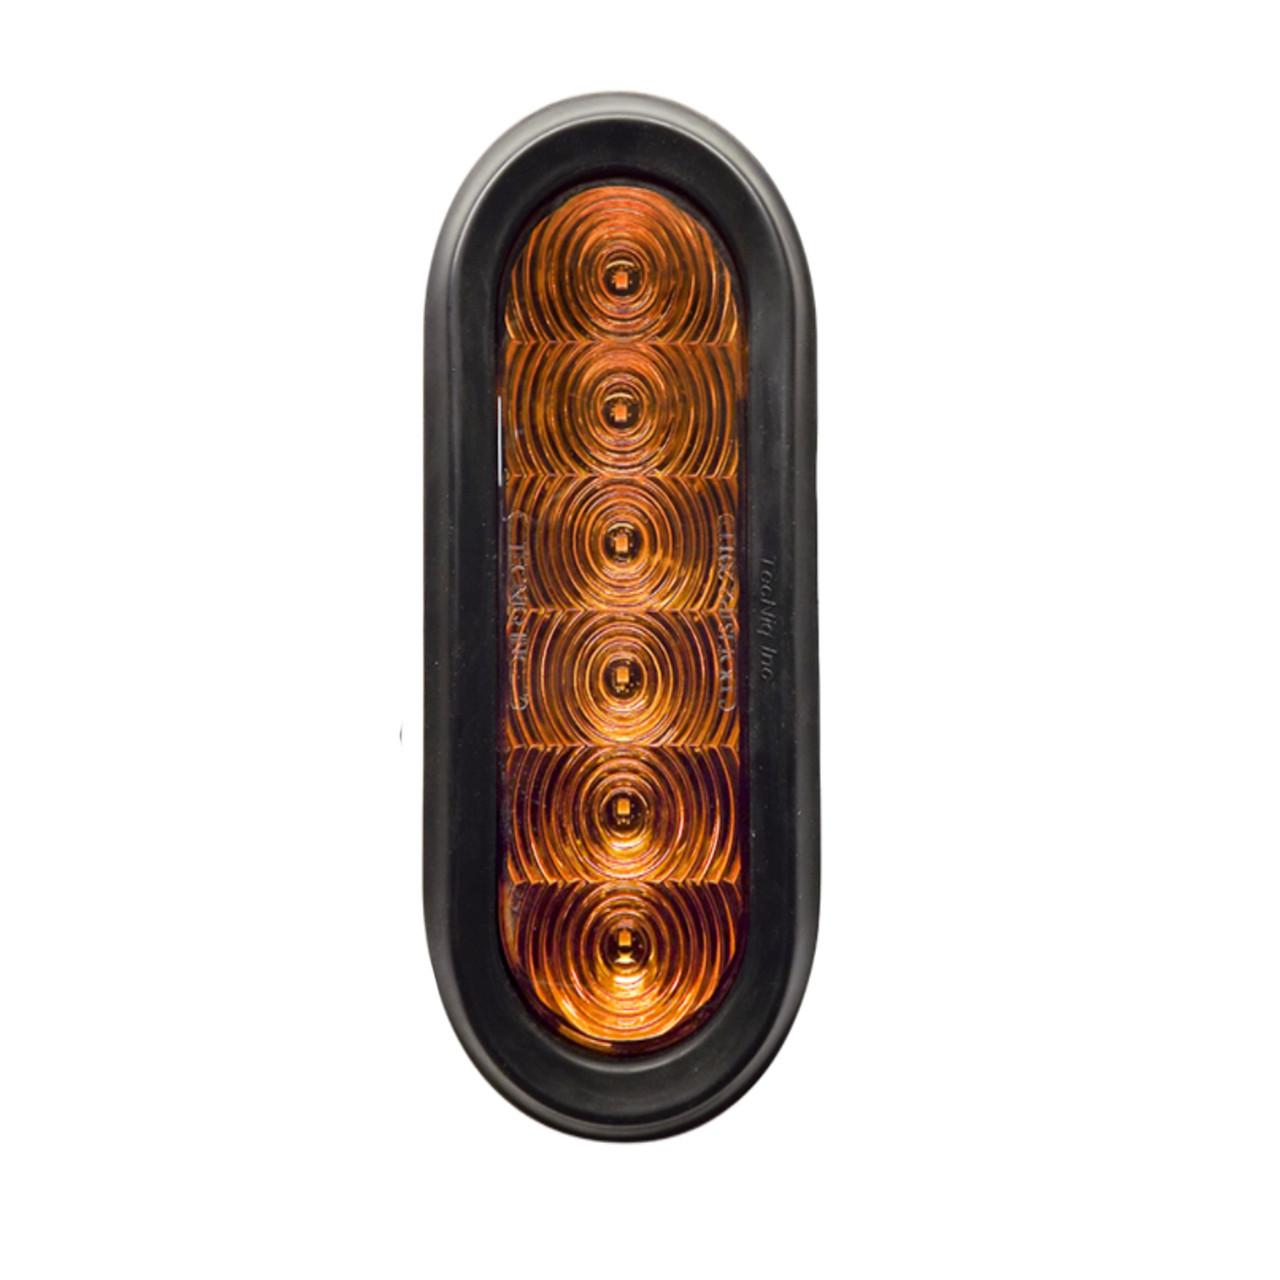 Tecniq New OEM 6" Oval 6 LED Turn Dual Intensity Grommet Mount Amber Lens Pigtail, T66-AA0P-1